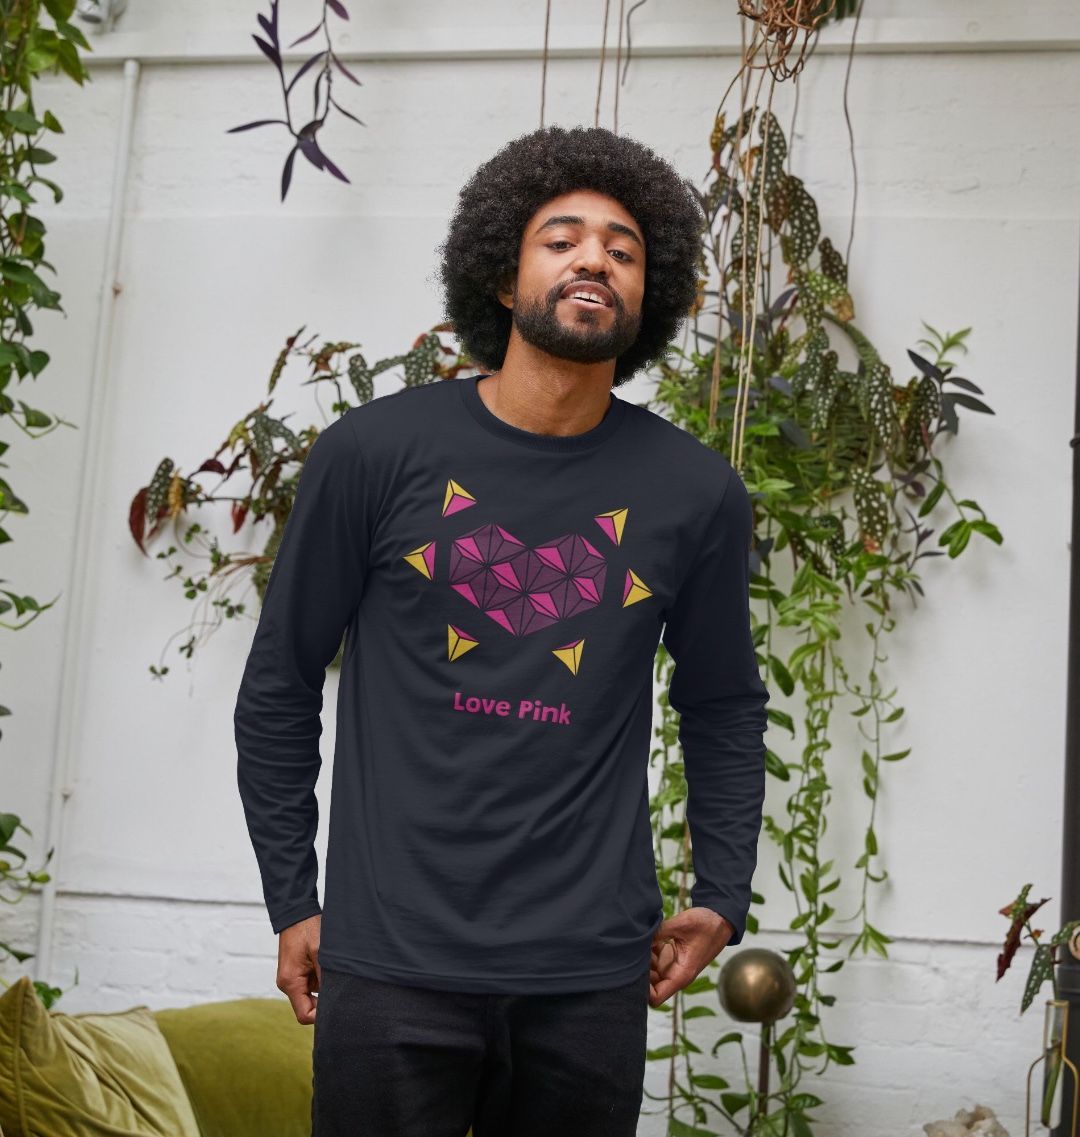 Man wearing "Love Pink" long sleeves t-shirt by unamarz Creations